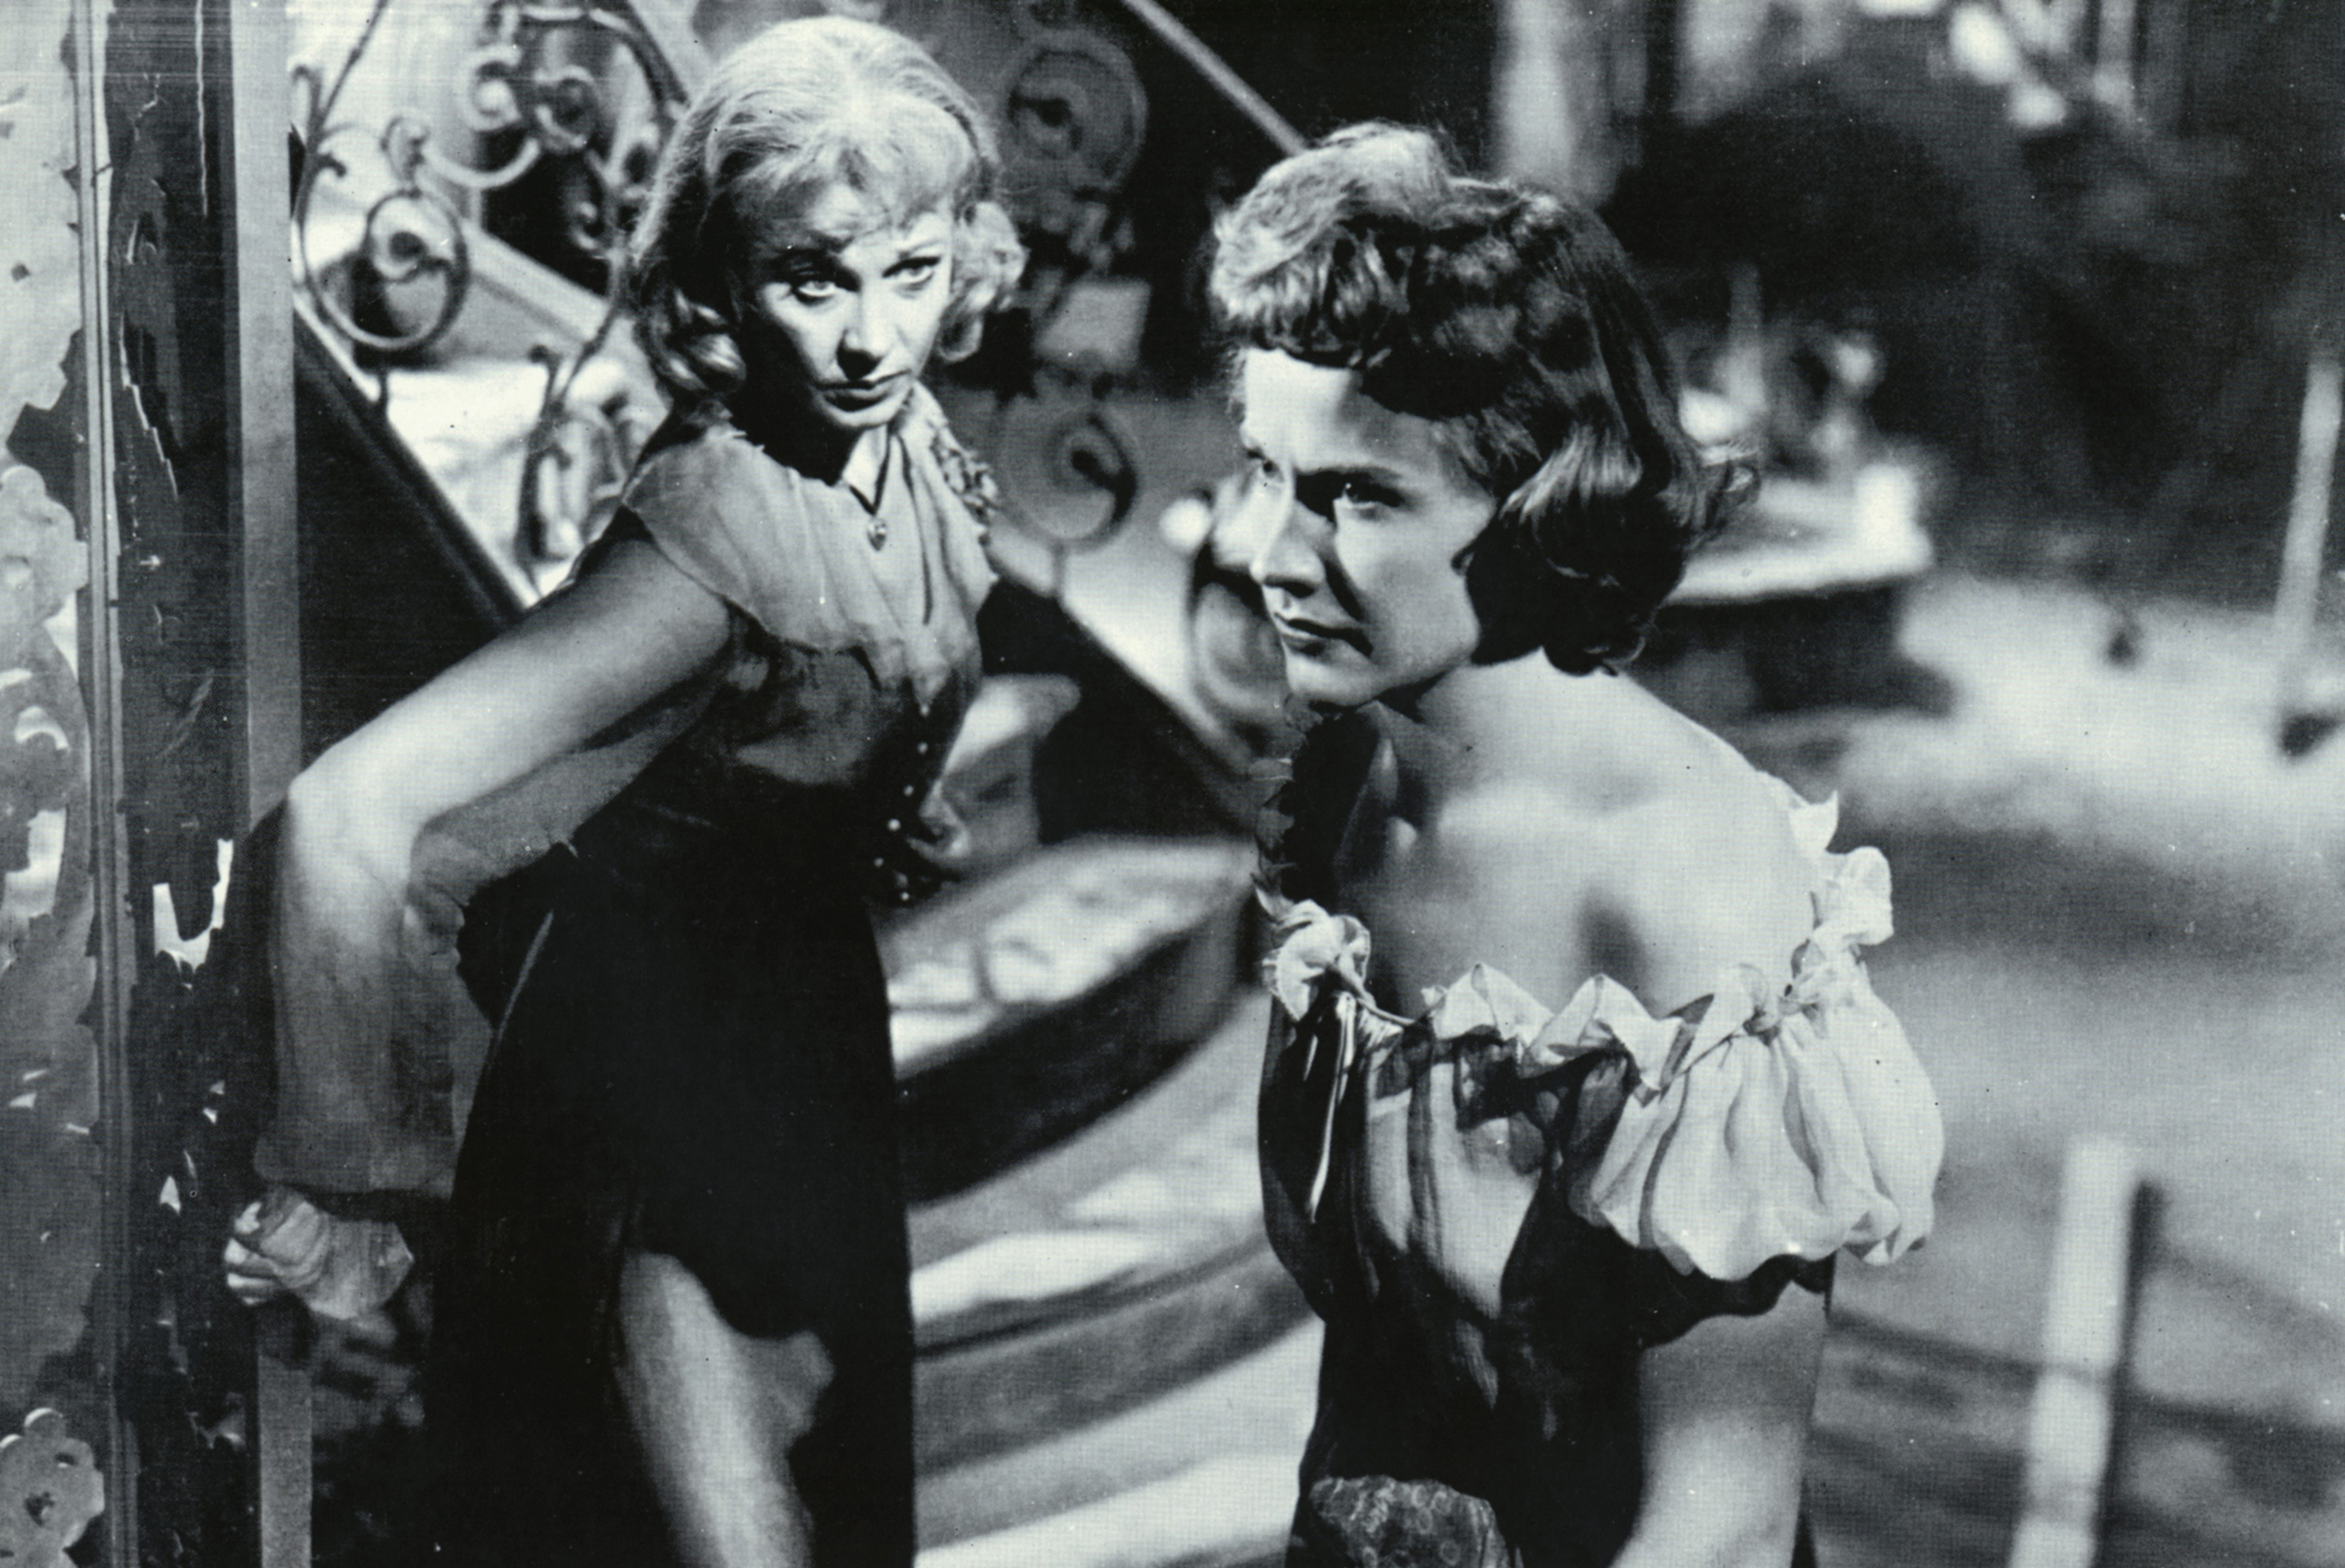 Blanche and Stella, A Streetcar Named Desire, 1951.